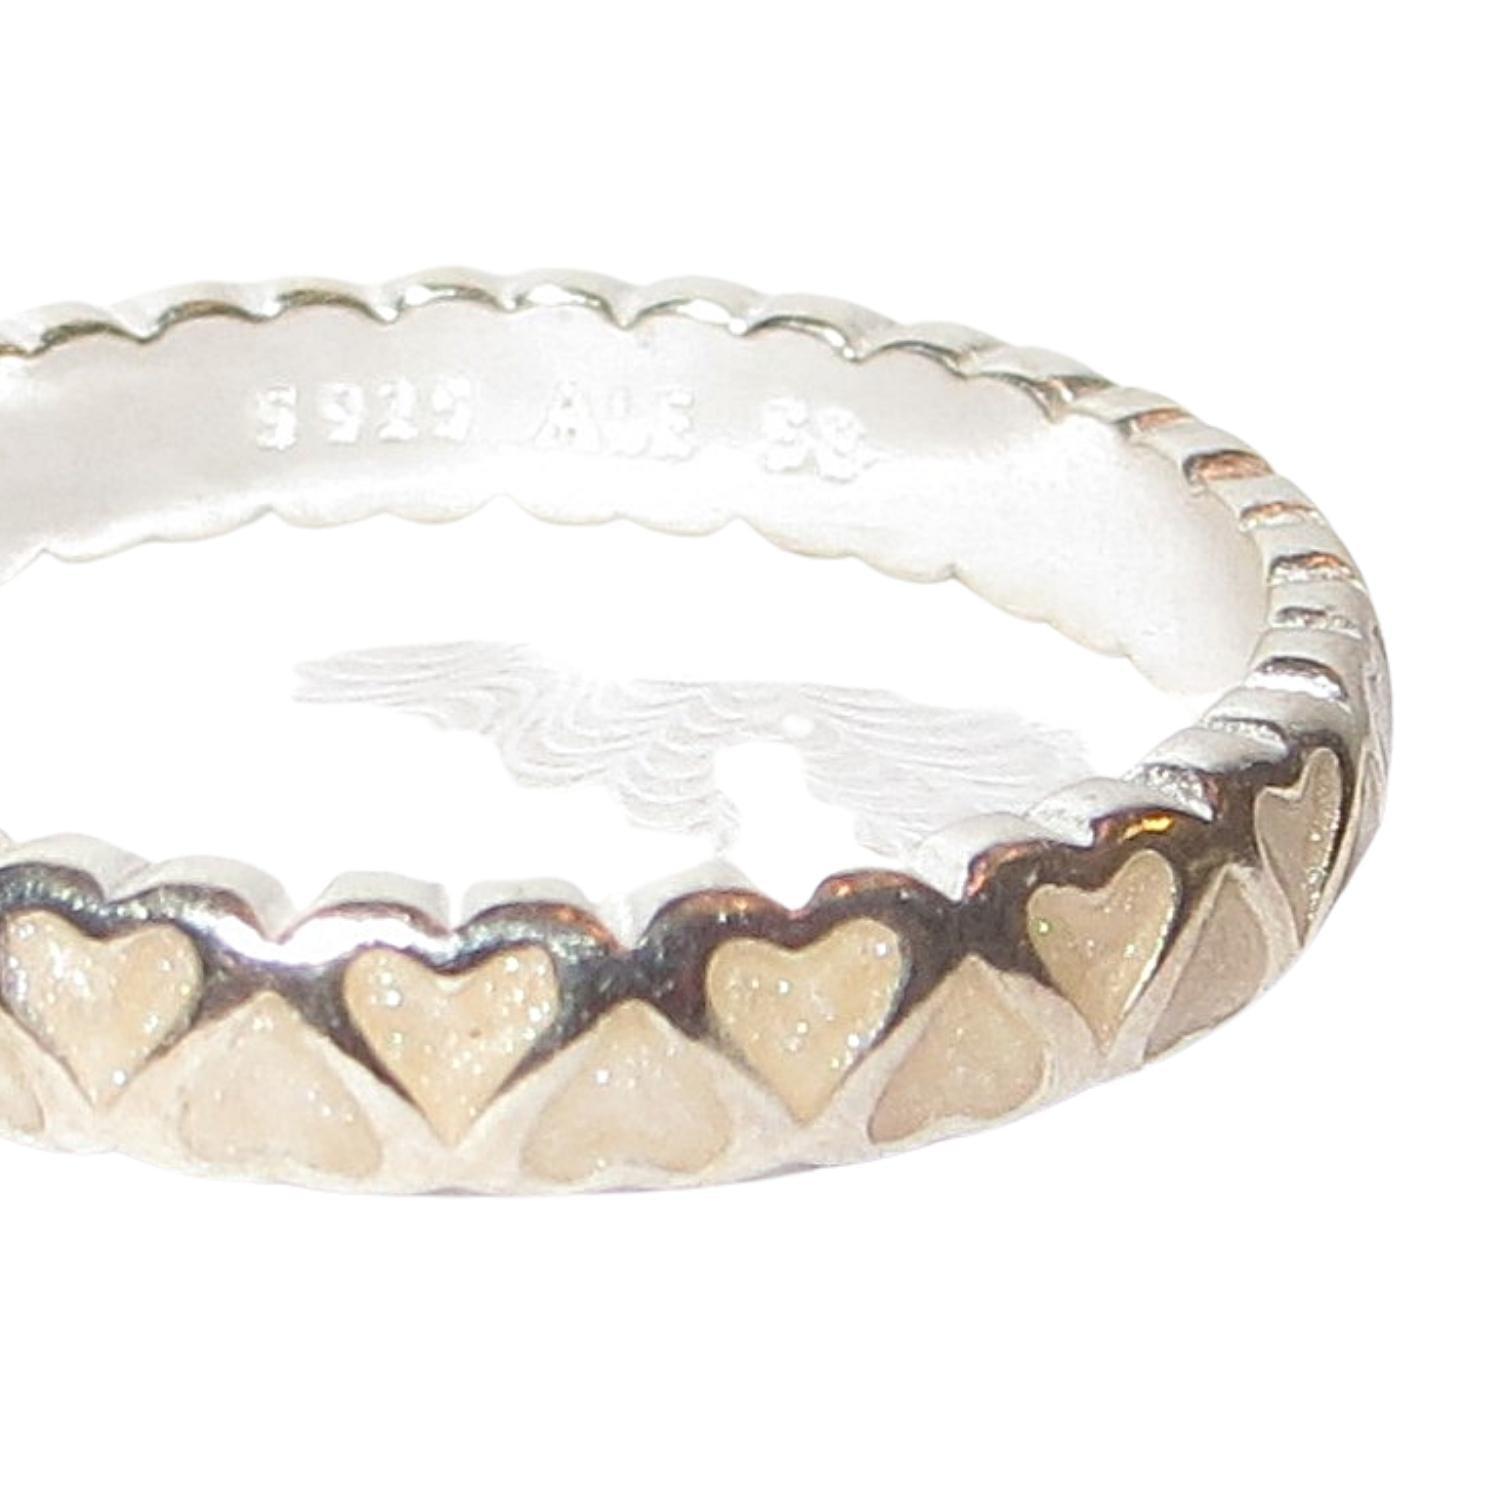 Pandora 190975EN23 ABUNDANCE OF LOVE Enamel and Sterling Silver Stacking Ring.  A medium width stacking band with creamy white enamel hearts set in sterling.